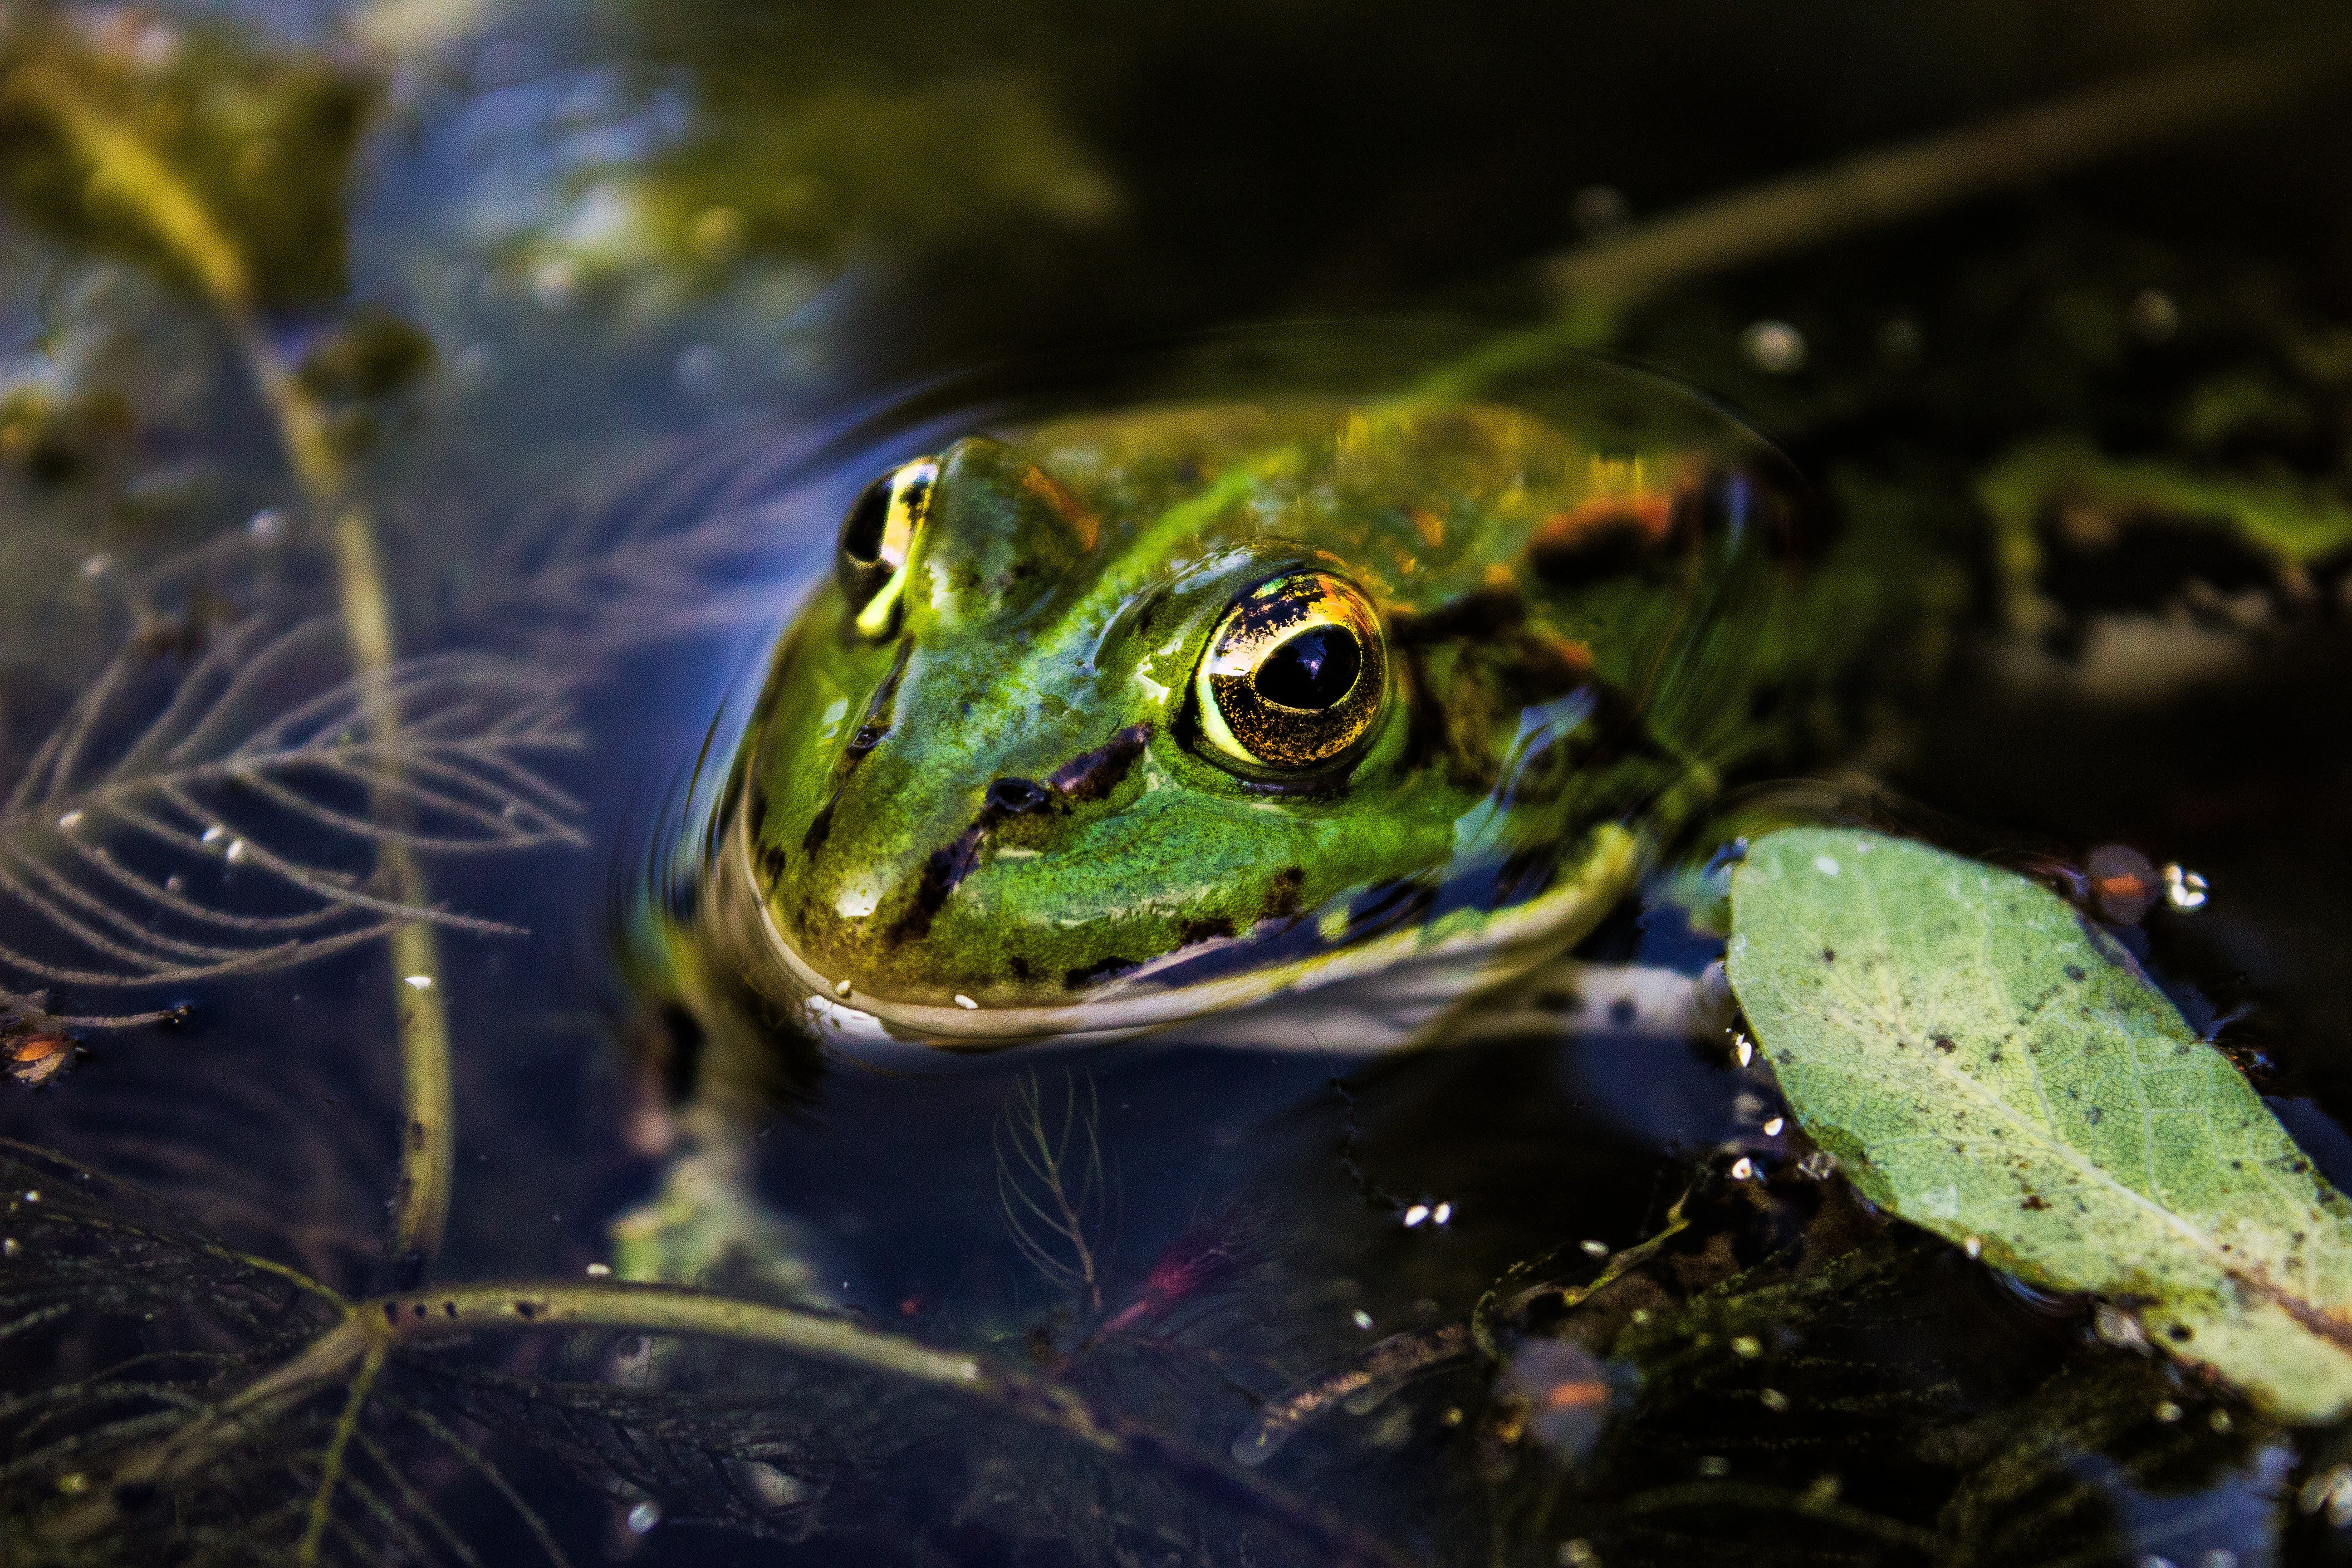 Pictured - A green toad in water | Source: Pexels 